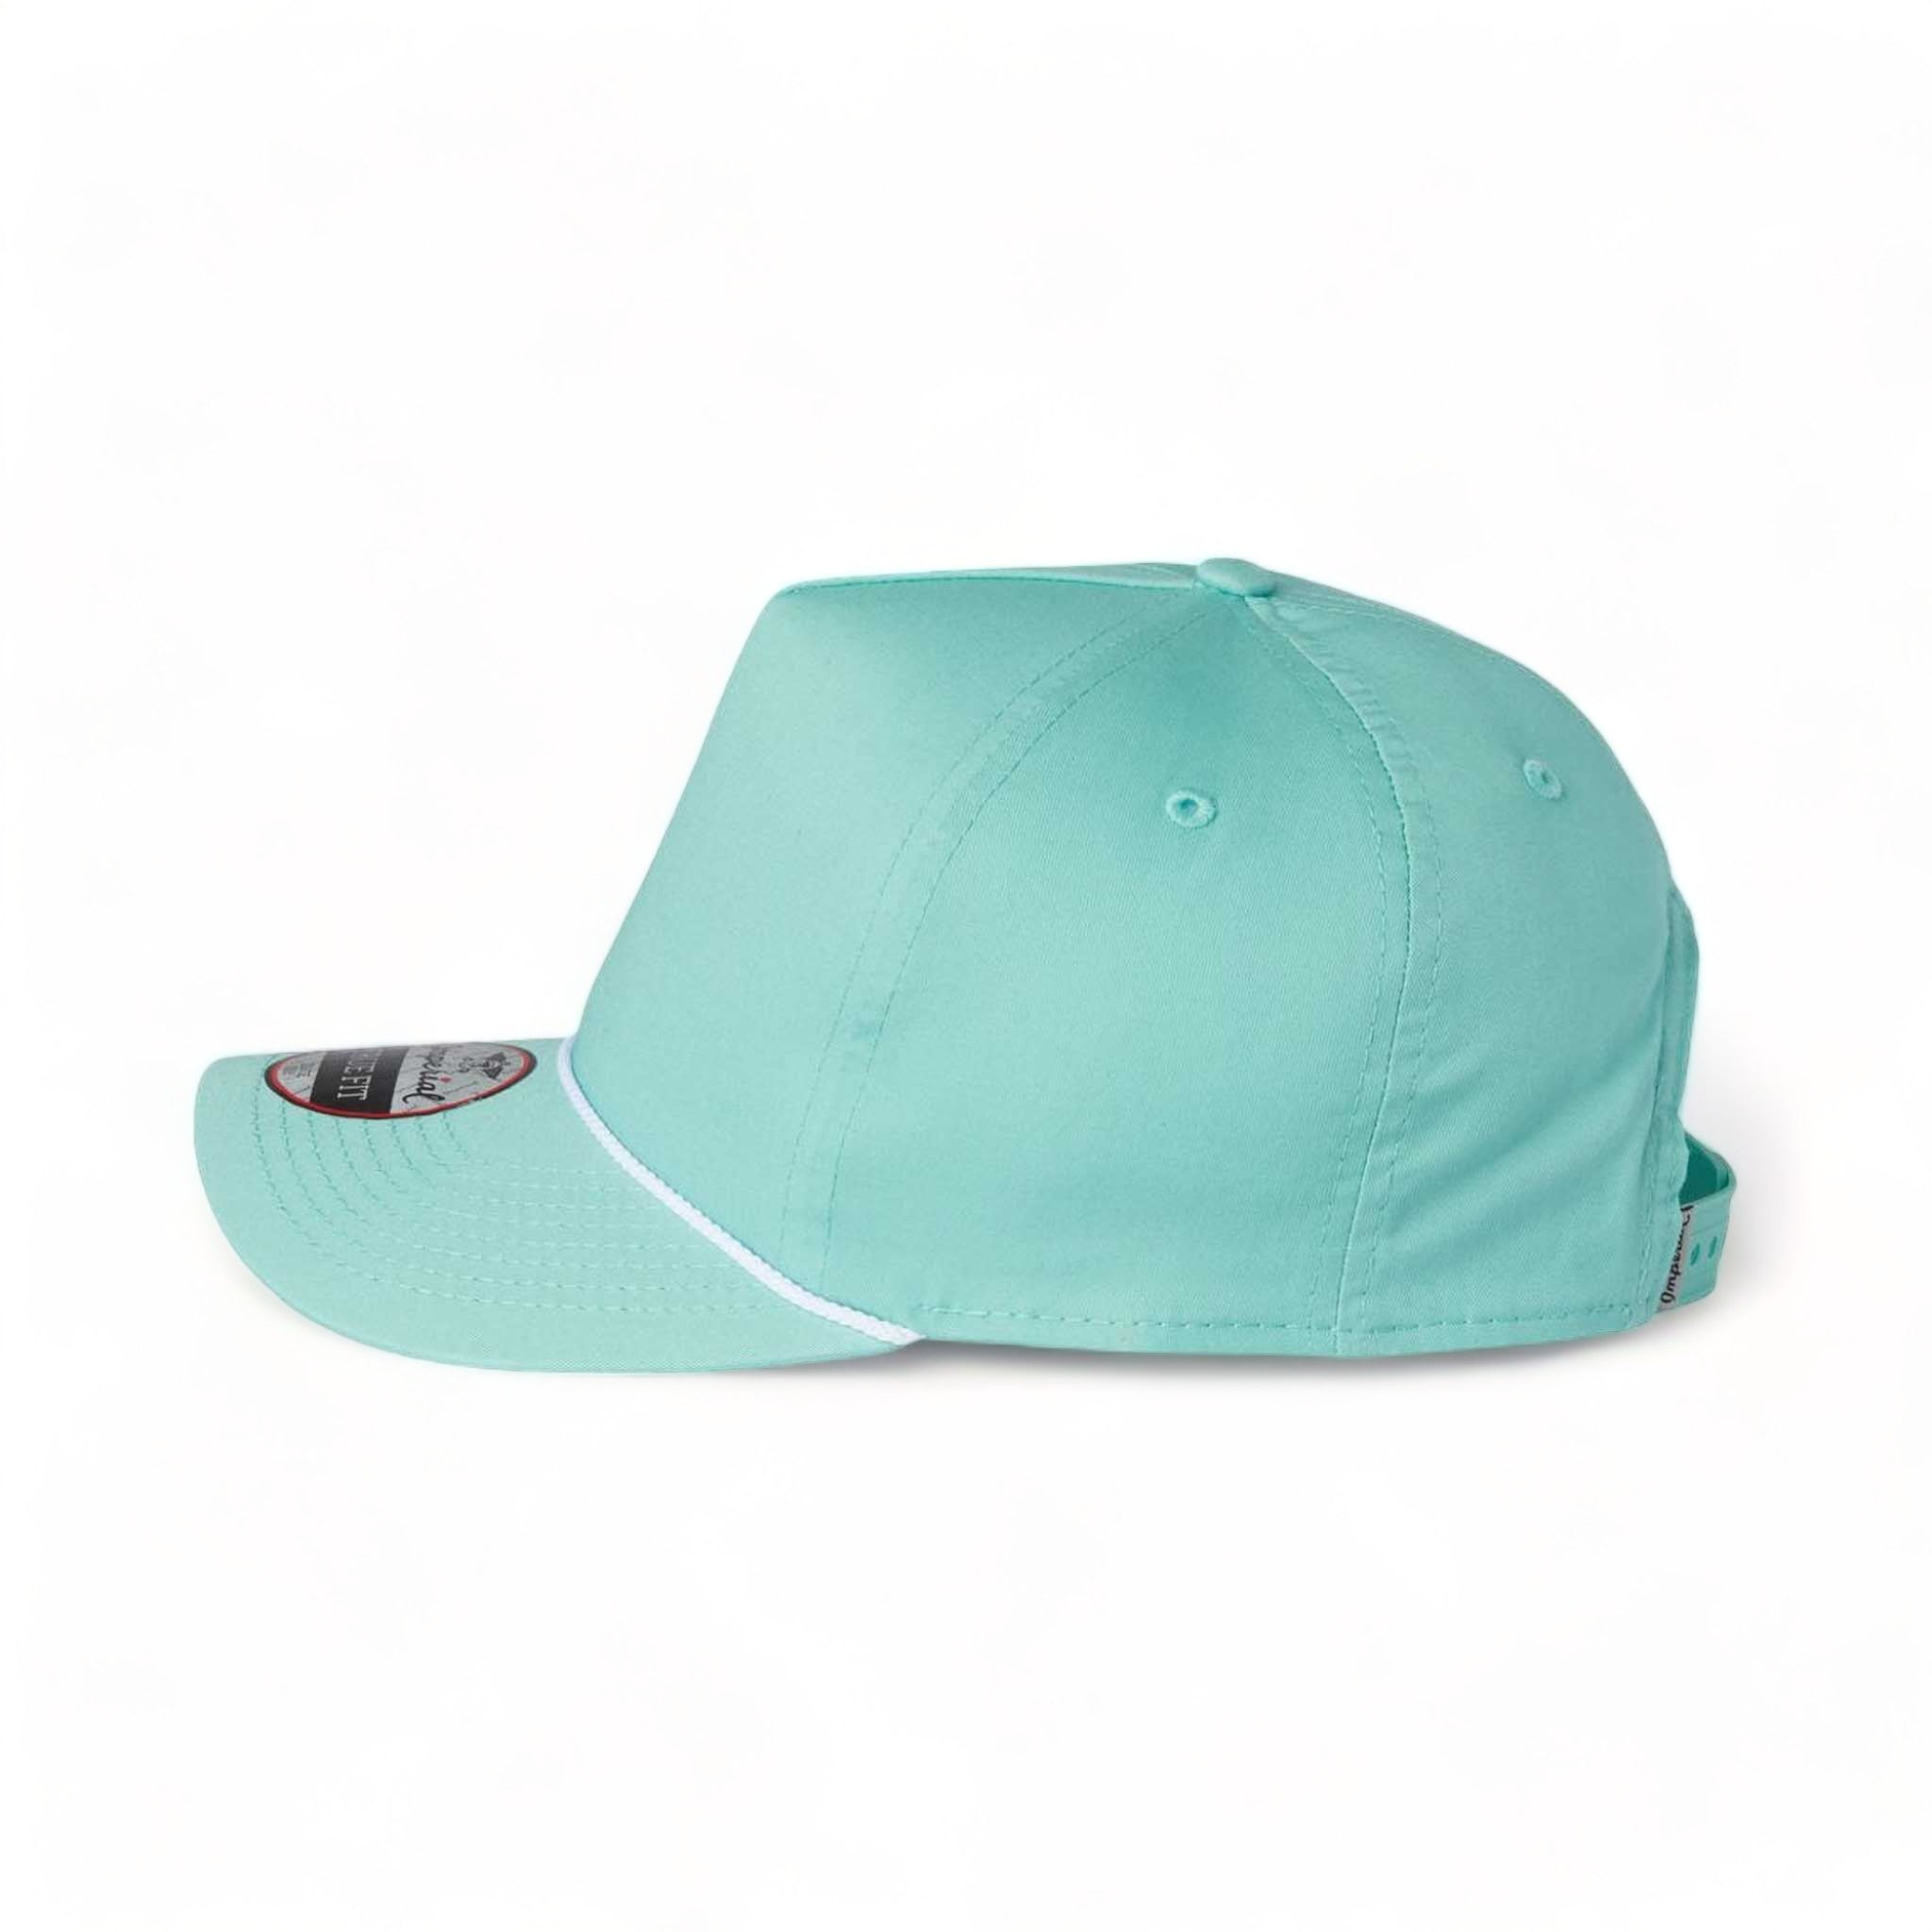 Side view of Imperial 5056 custom hat in sea green and white